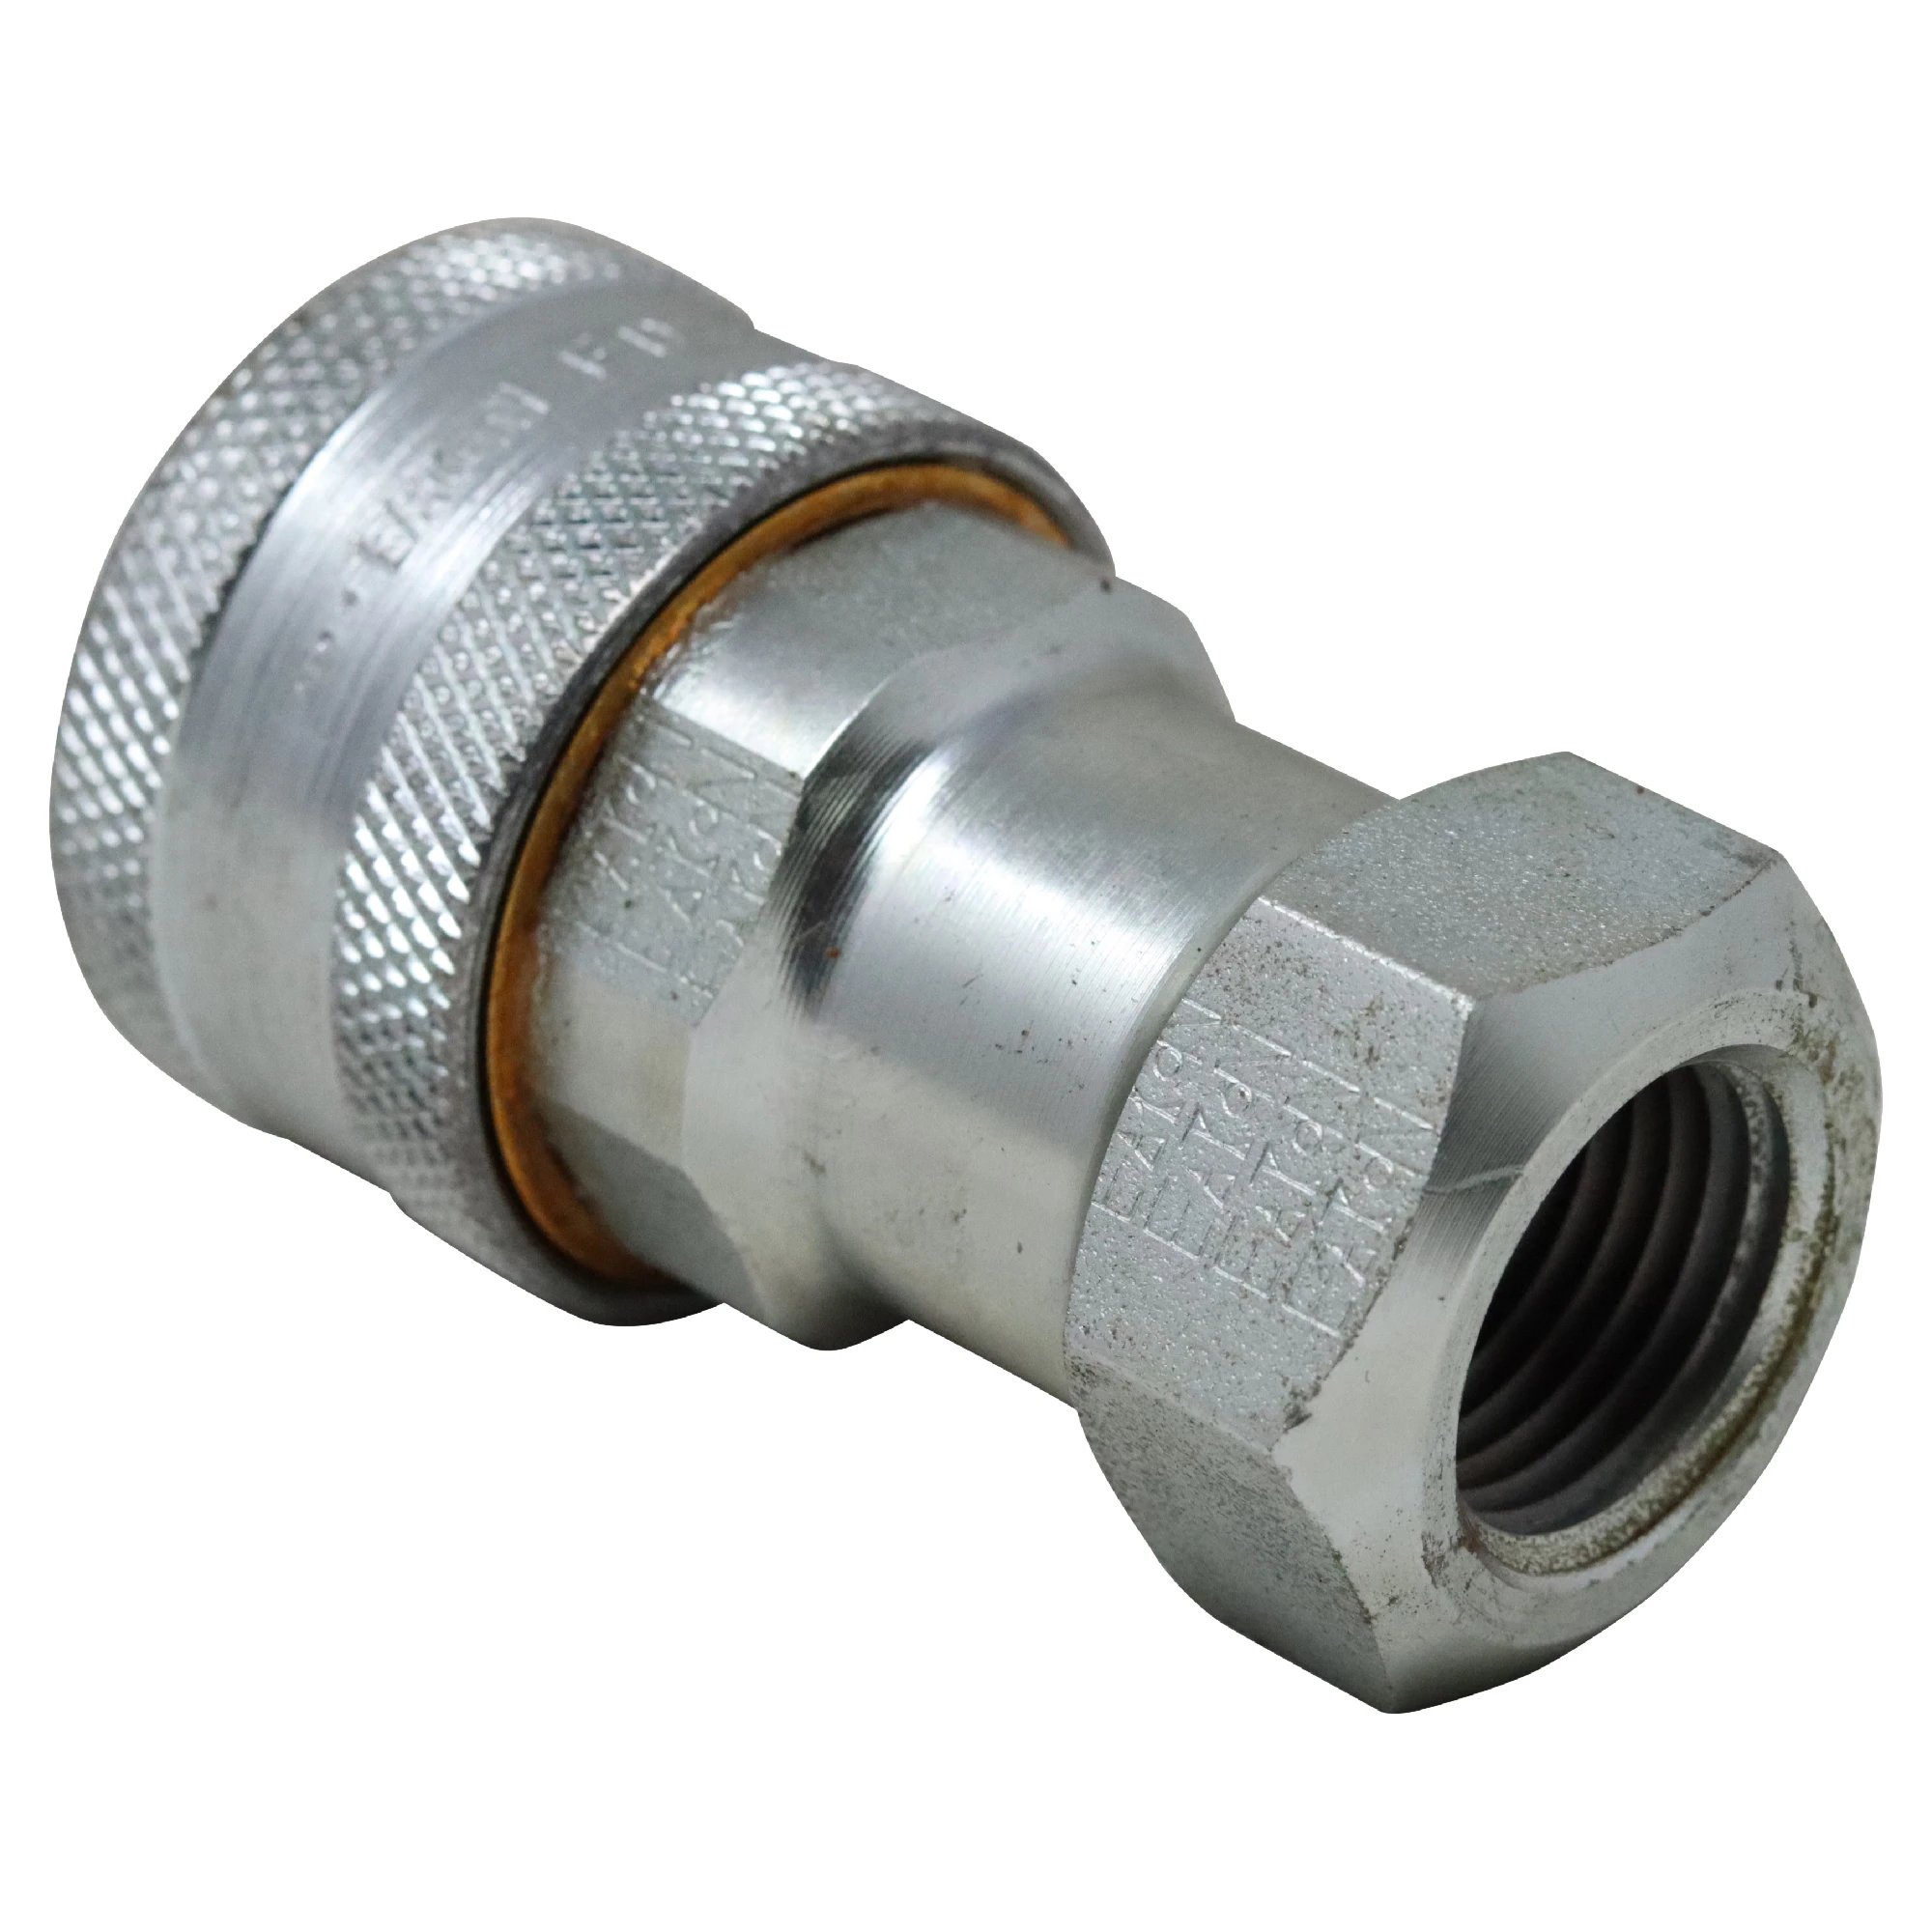 Galbreath® Quick Disconnect Coupler 1/2FP X-10